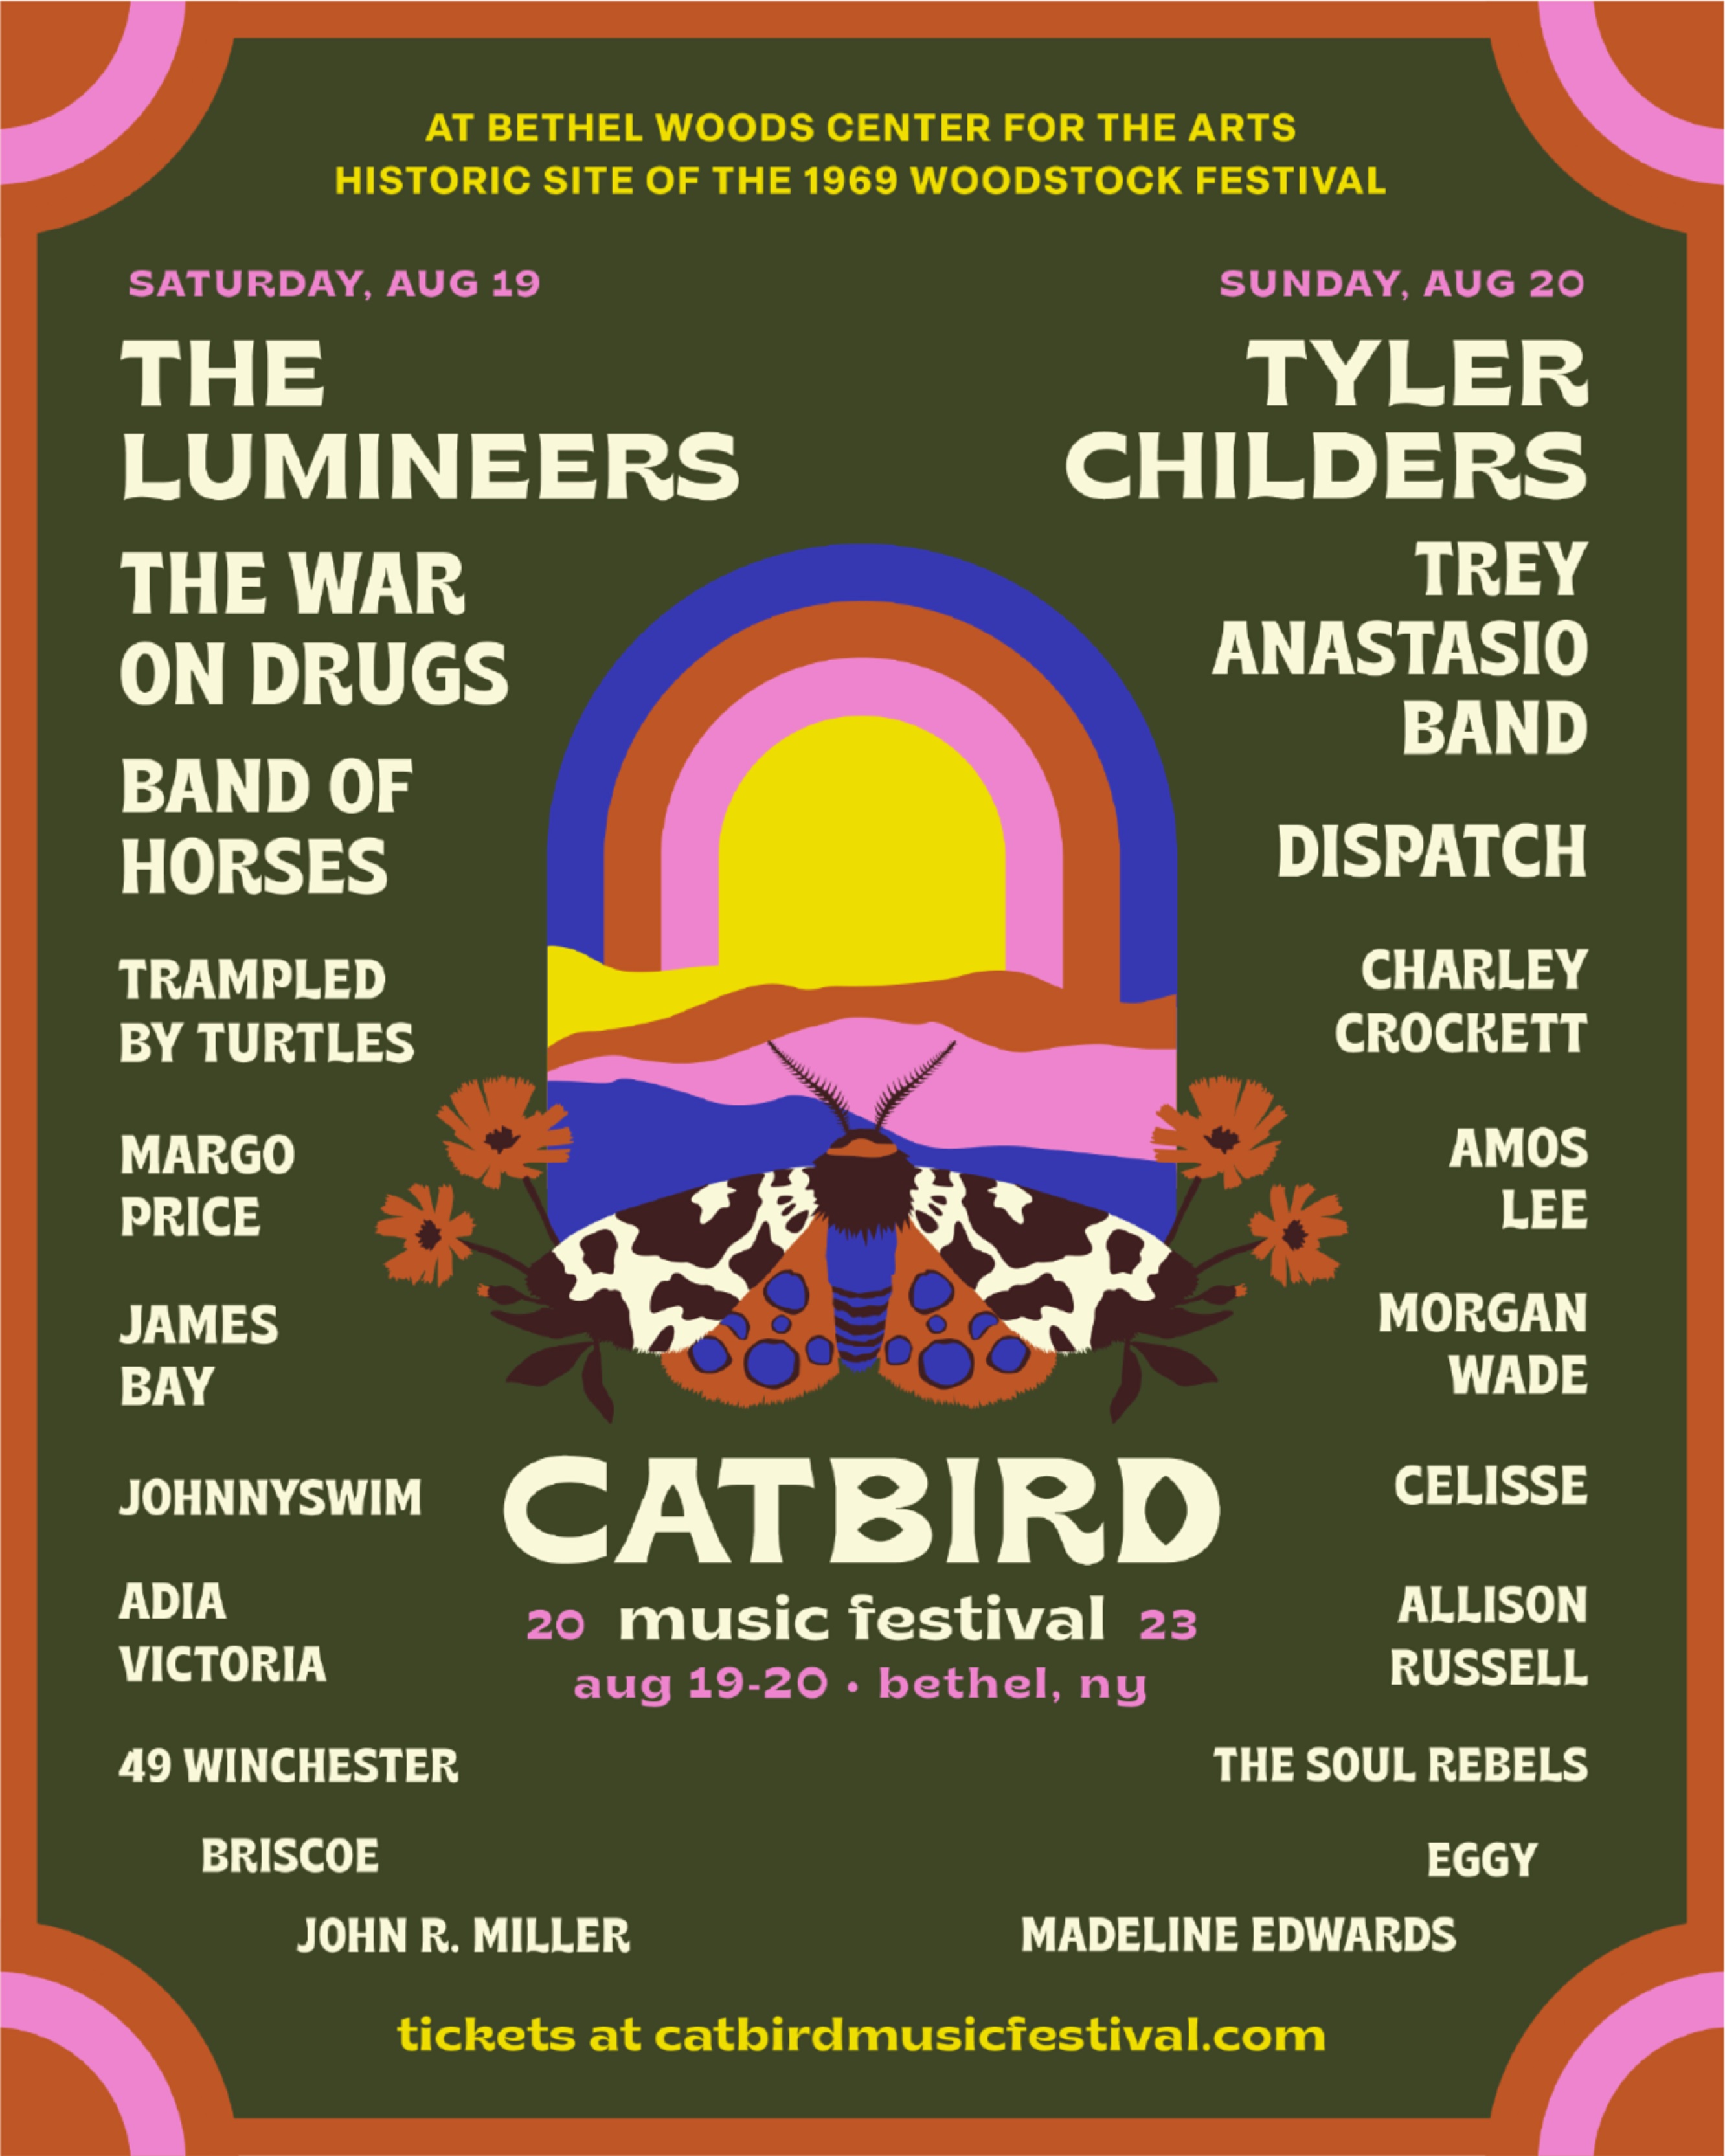 Catbird fest unveils inaugural lineup; first camping and music event on historic Woodstock field since 1969